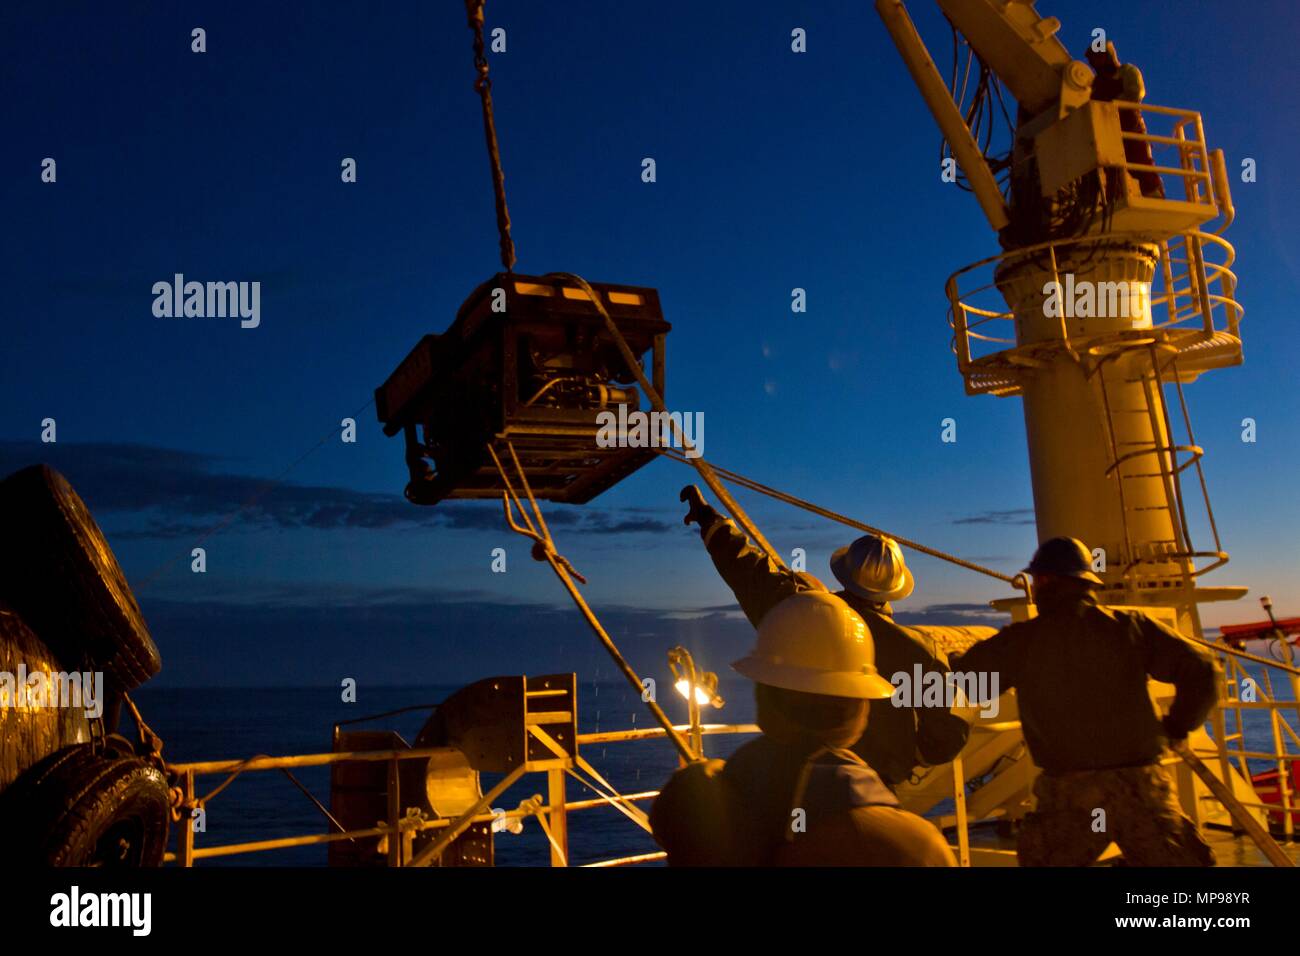 U.S. Navy sailors deploy an underwater remotely operated vehicle (ROV) from the deck of the Norwegian offshore construction support vessel Skandi Patagonia at night December 1, 2017 in the Atlantic Ocean.   (photo by Derek Harkins via Planetpix) Stock Photo